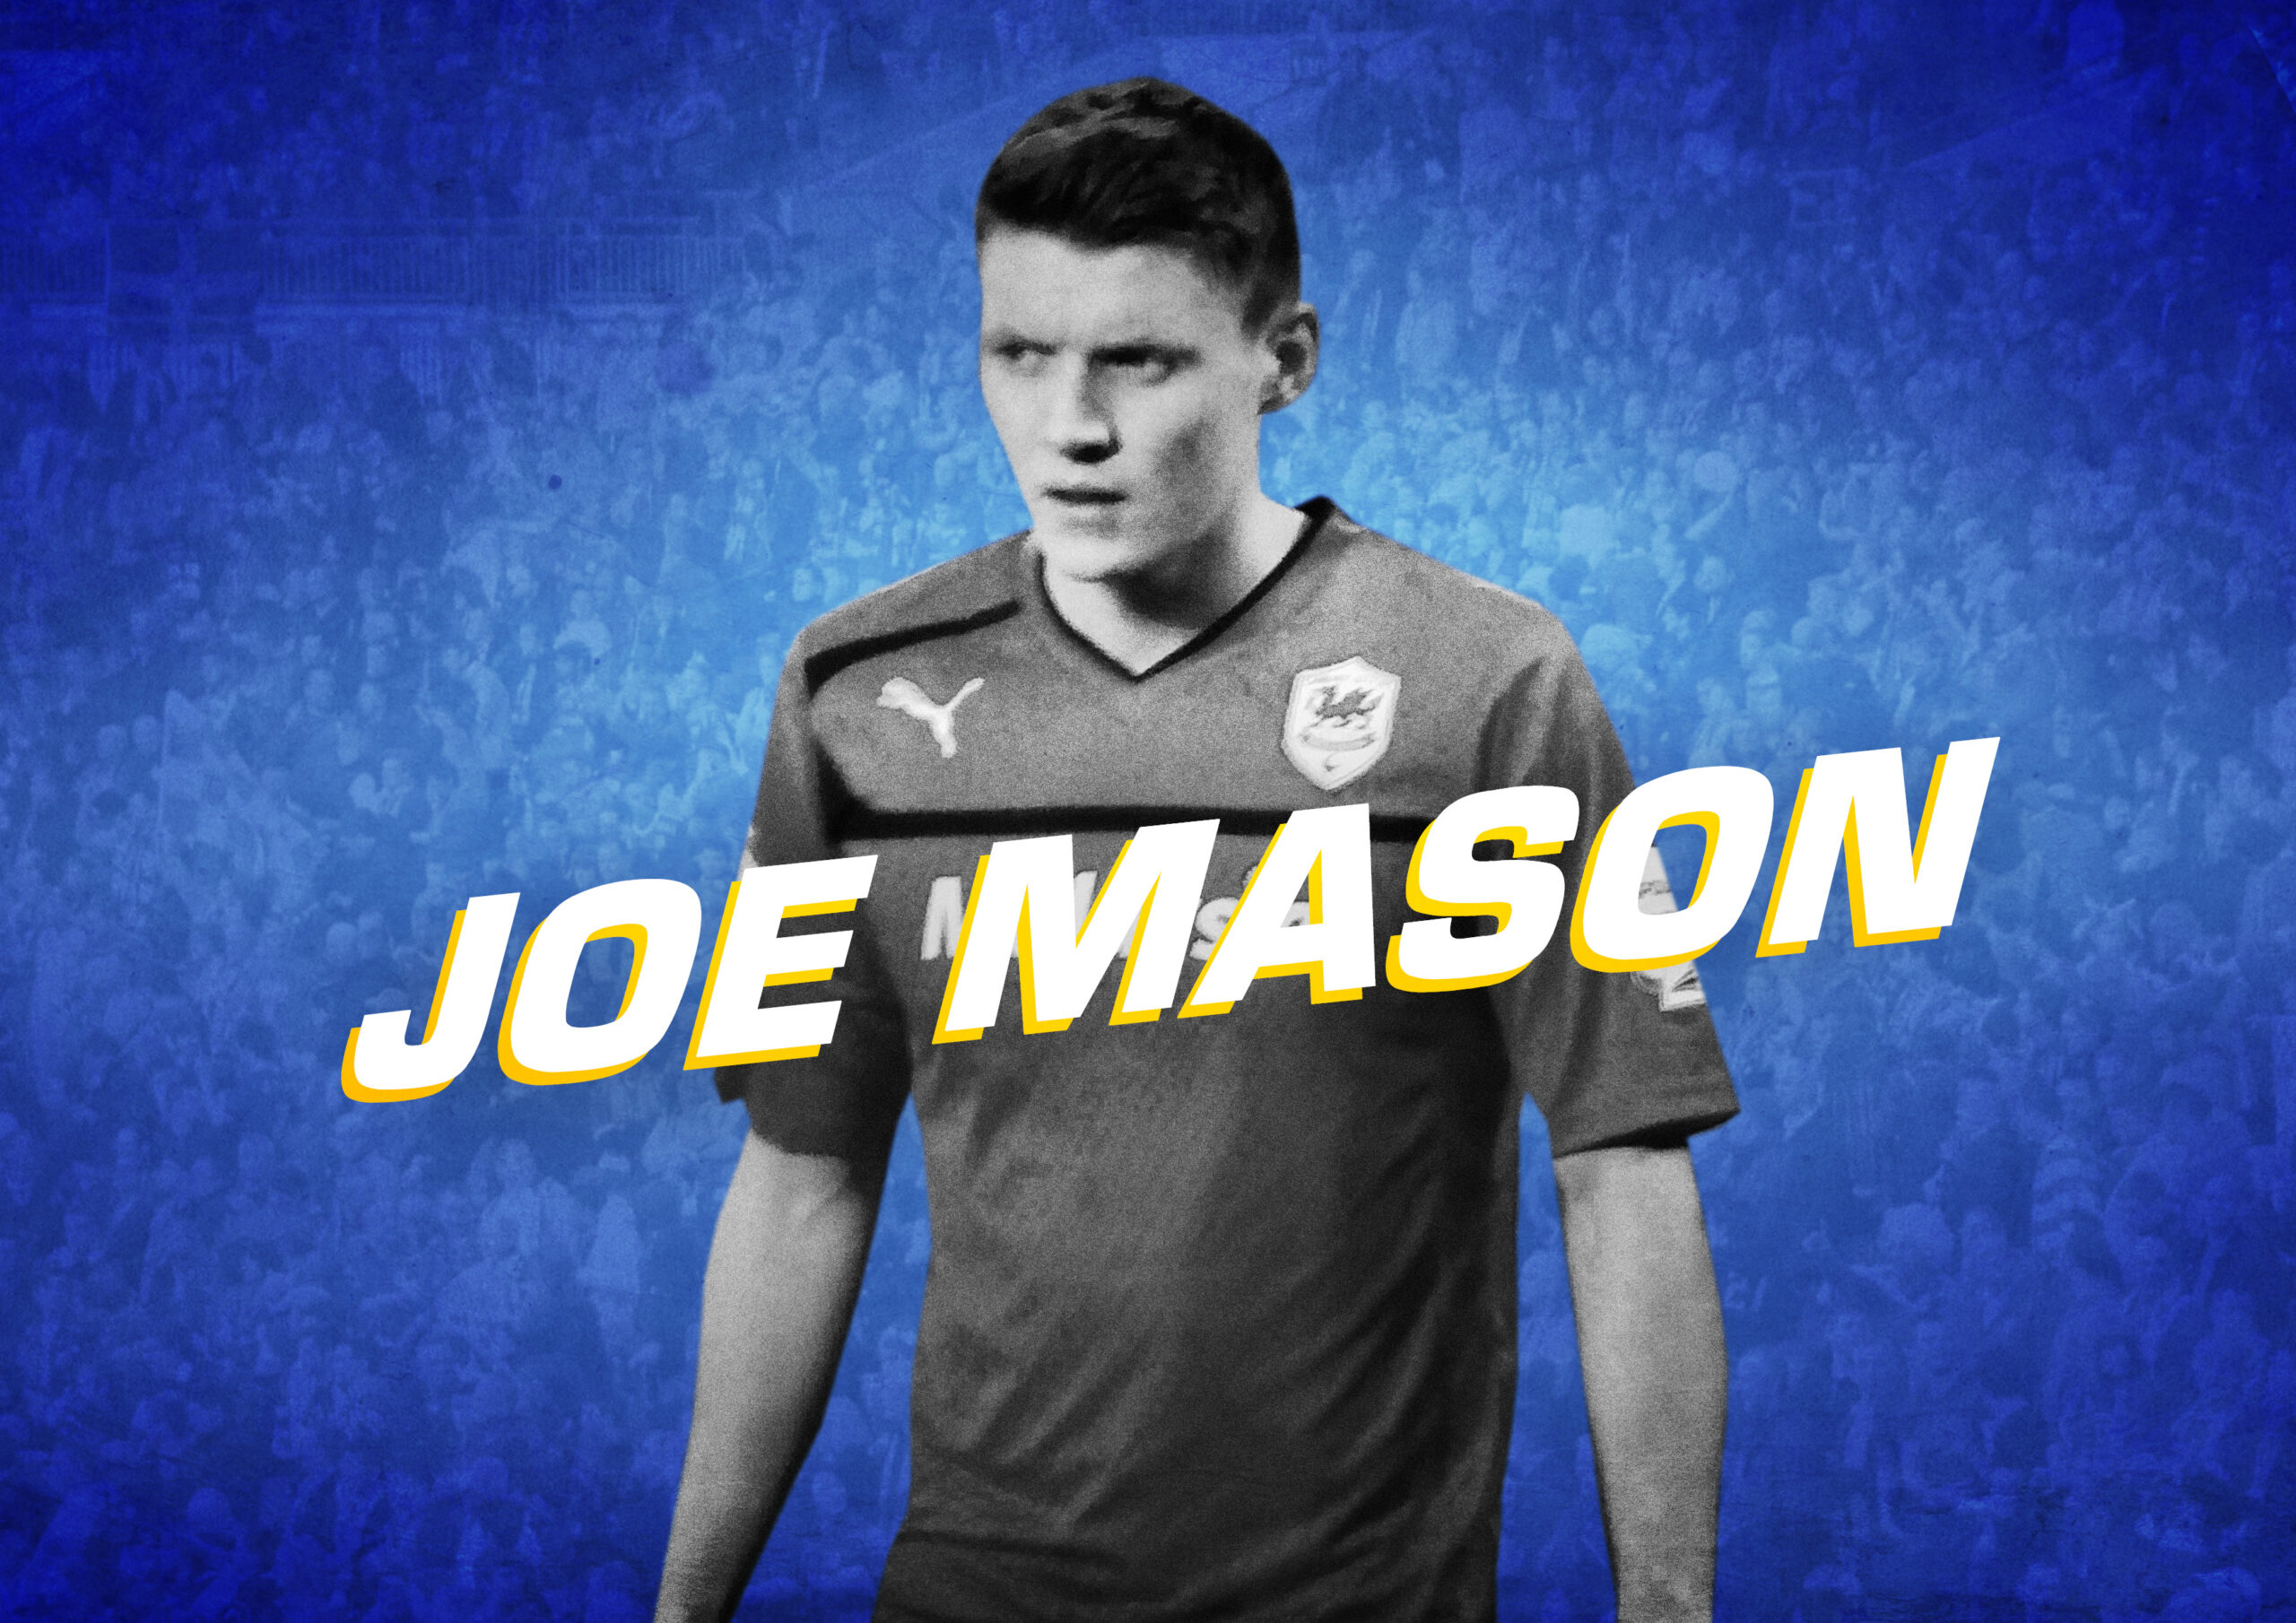 Joe Mason: “I was adamant that I wanted to stay at Cardiff”